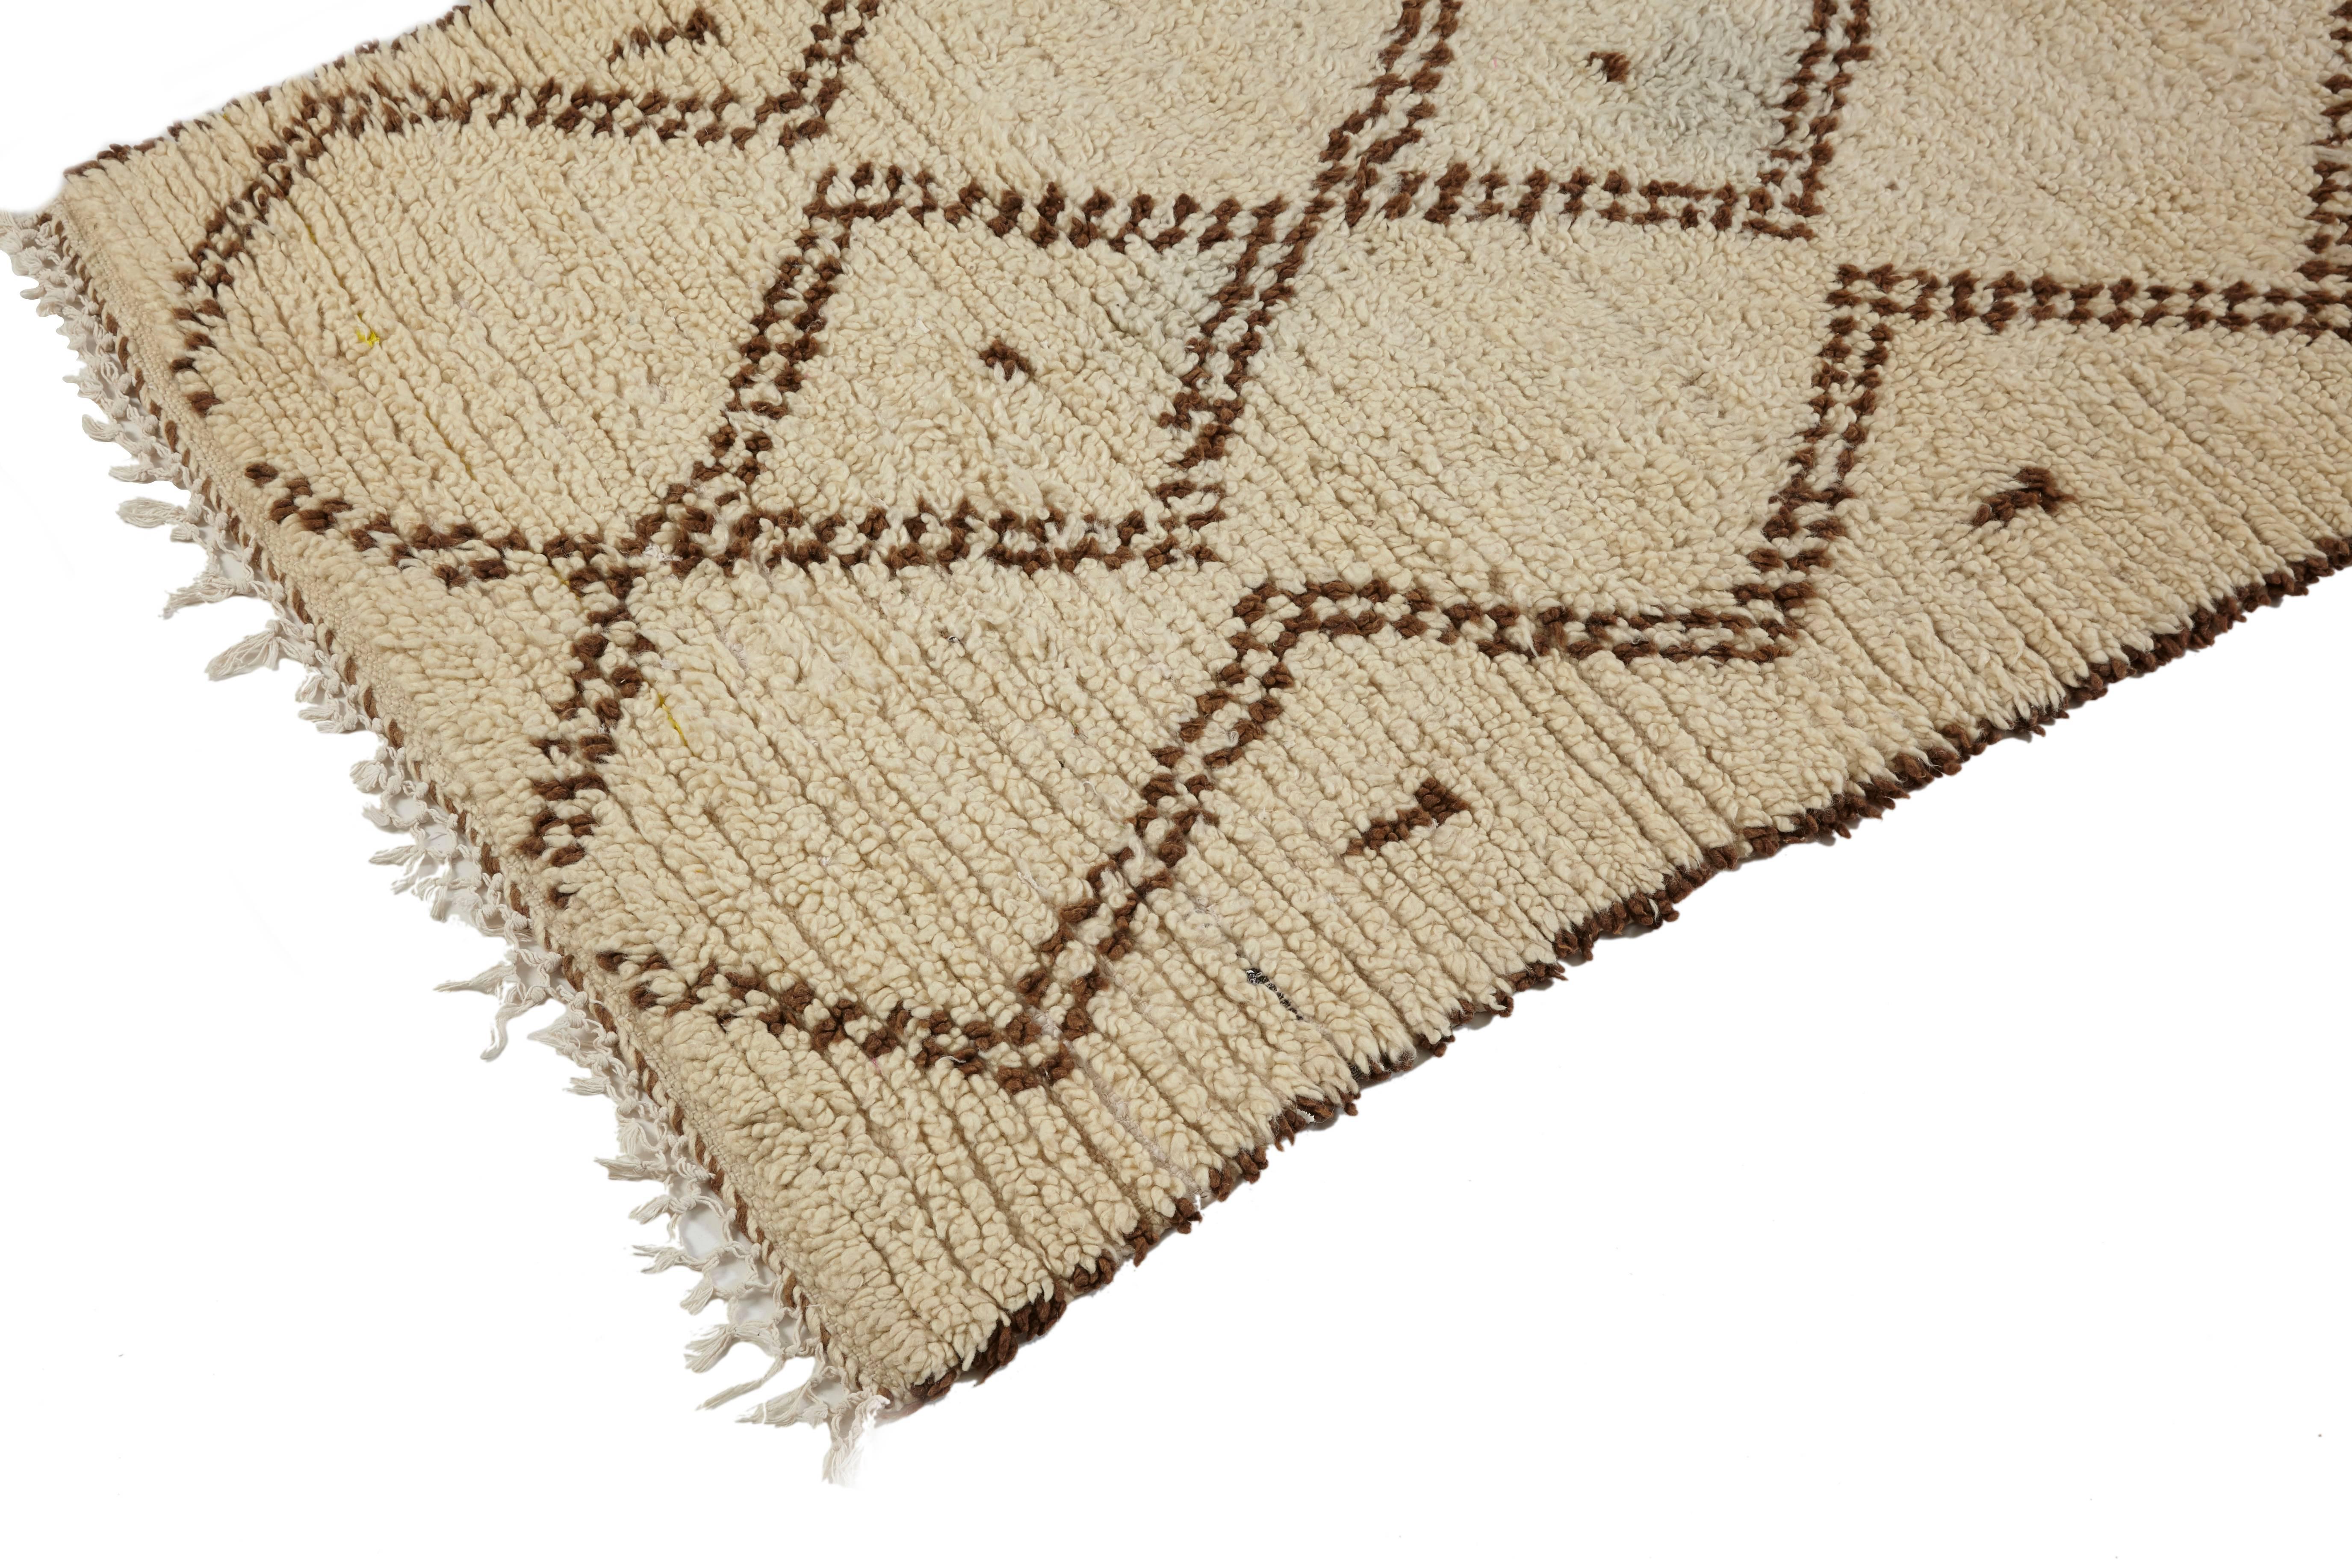 Beni Ouarain runner rug,
Middle Atlas Mountains,
Morocco
Late 20th century,
Wool, medium pile,
Yellow tone to the wool with brown motif

Measures: 355 x 100cm.